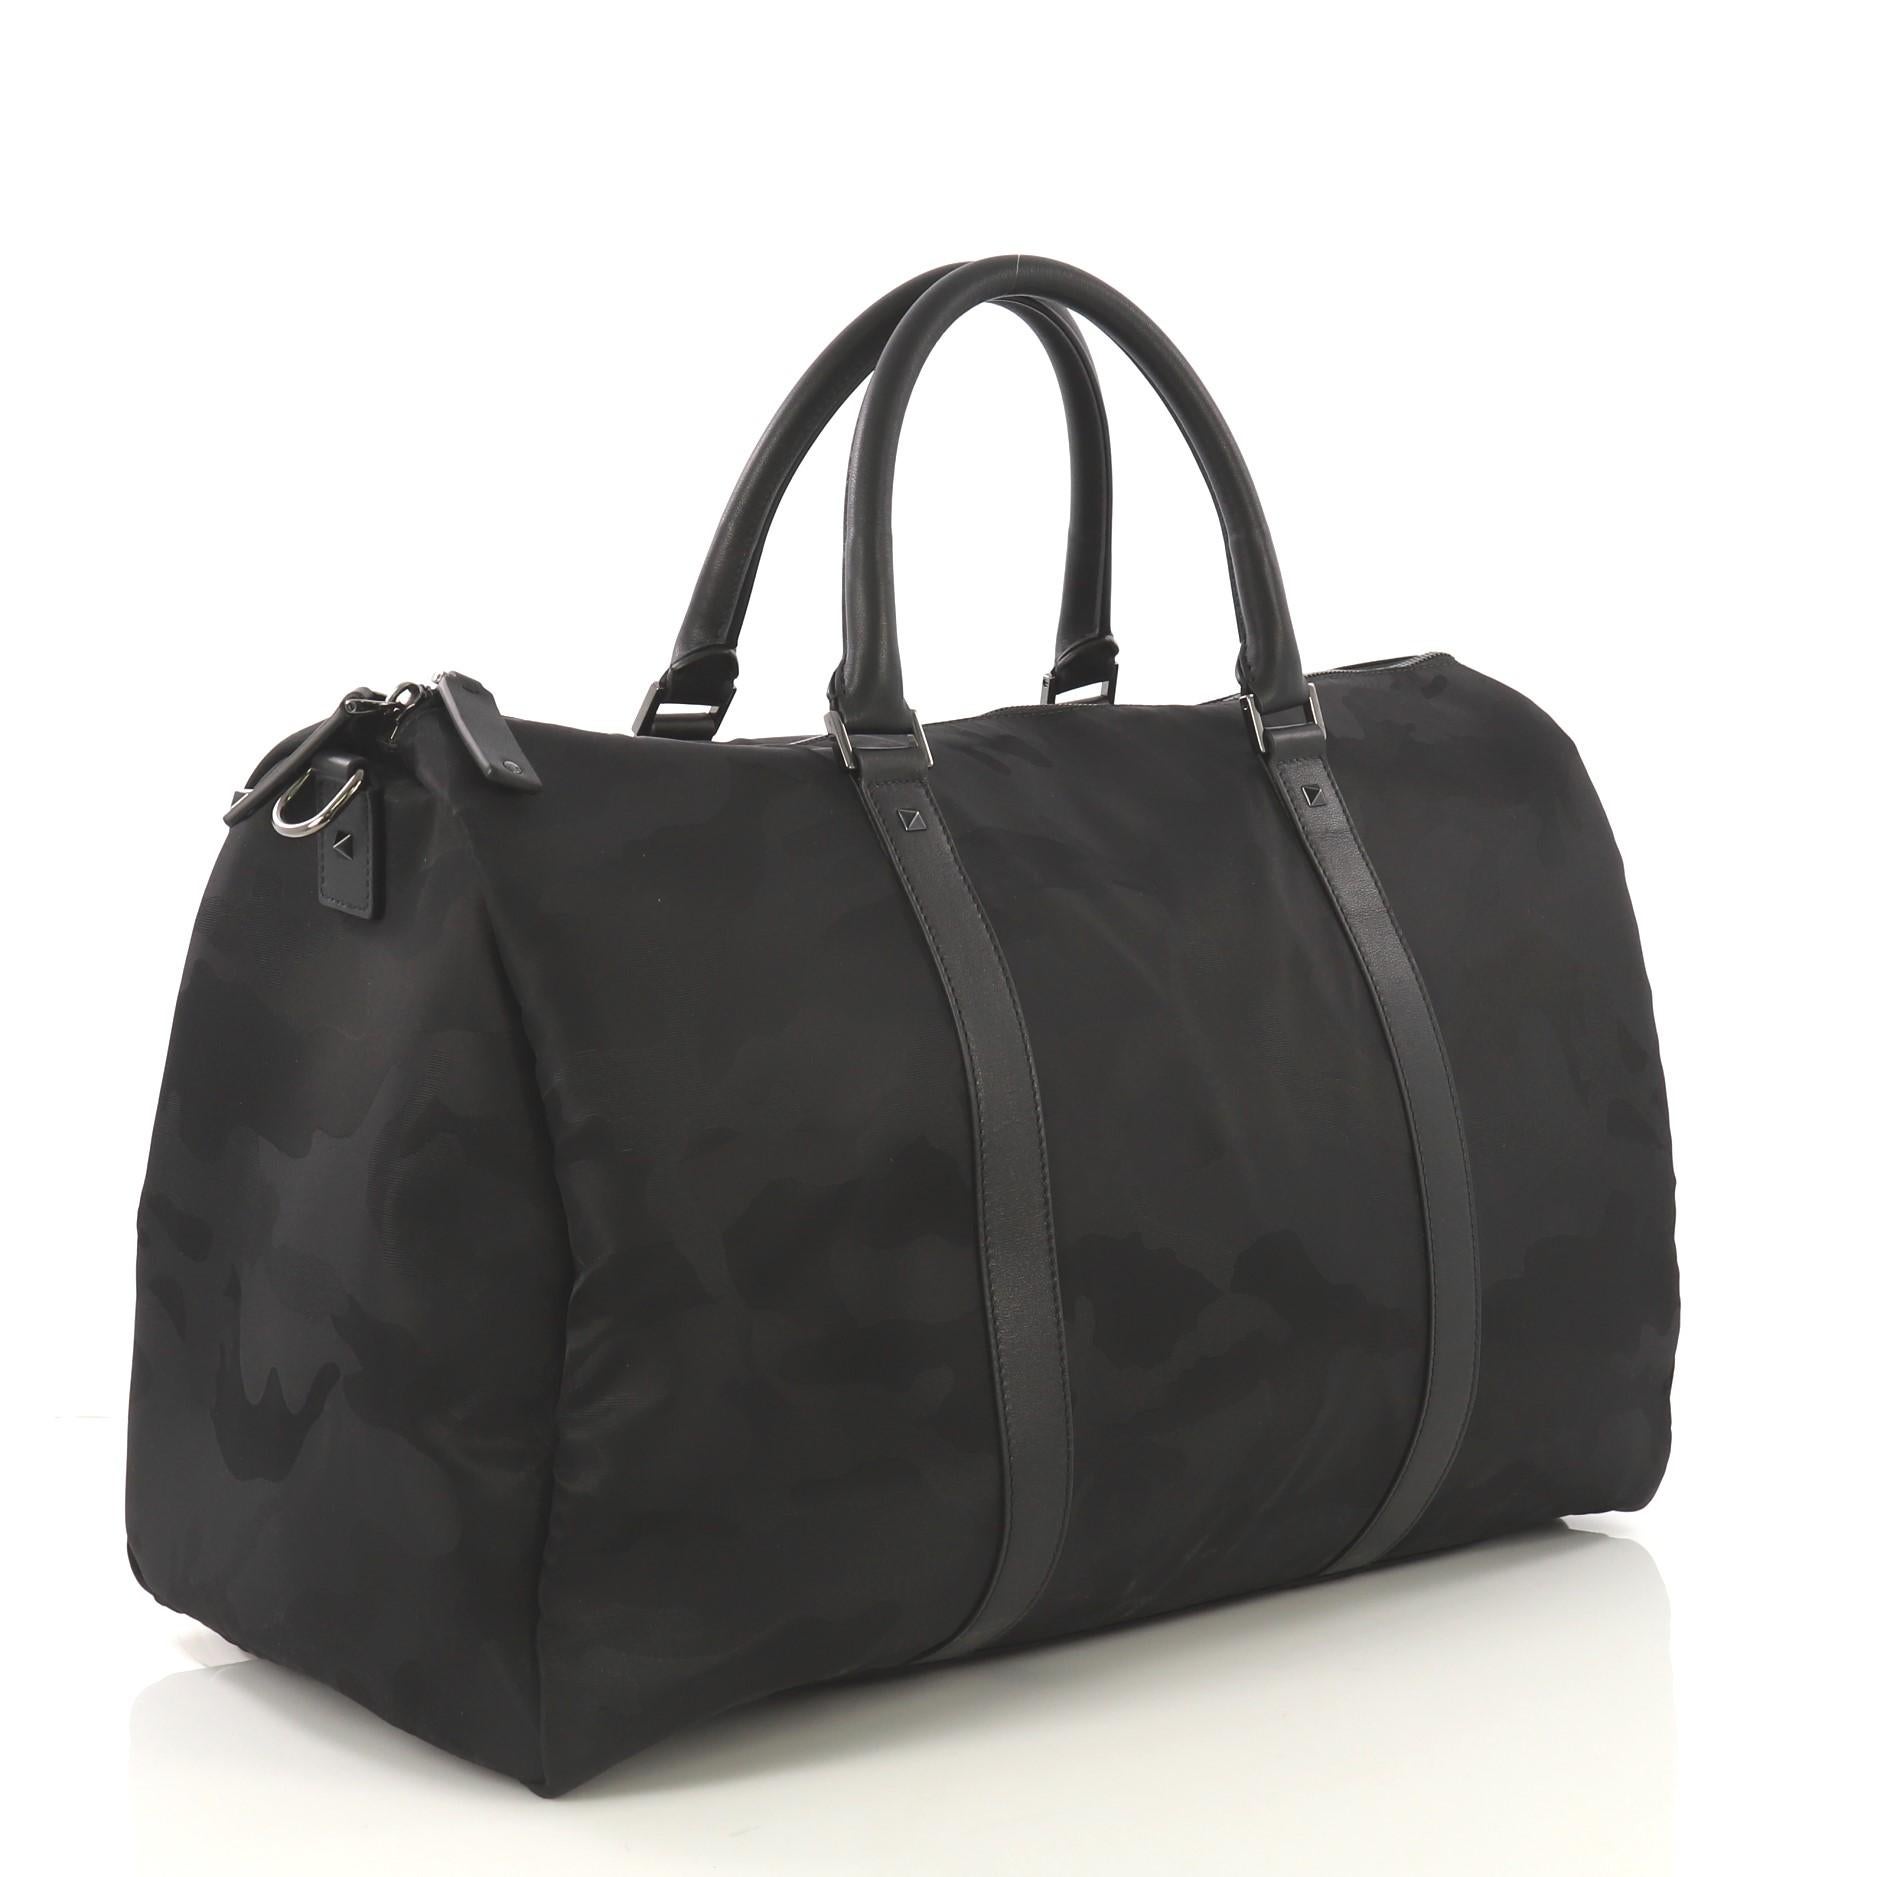 This Valentino Convertible Weekender Bag Camo Nylon Large, crafted from black camo nylon, features dual rolled leather handles, protective base studs, and black-tone hardware. Its zip closure opens to a black nylon interior. 

Estimated Retail